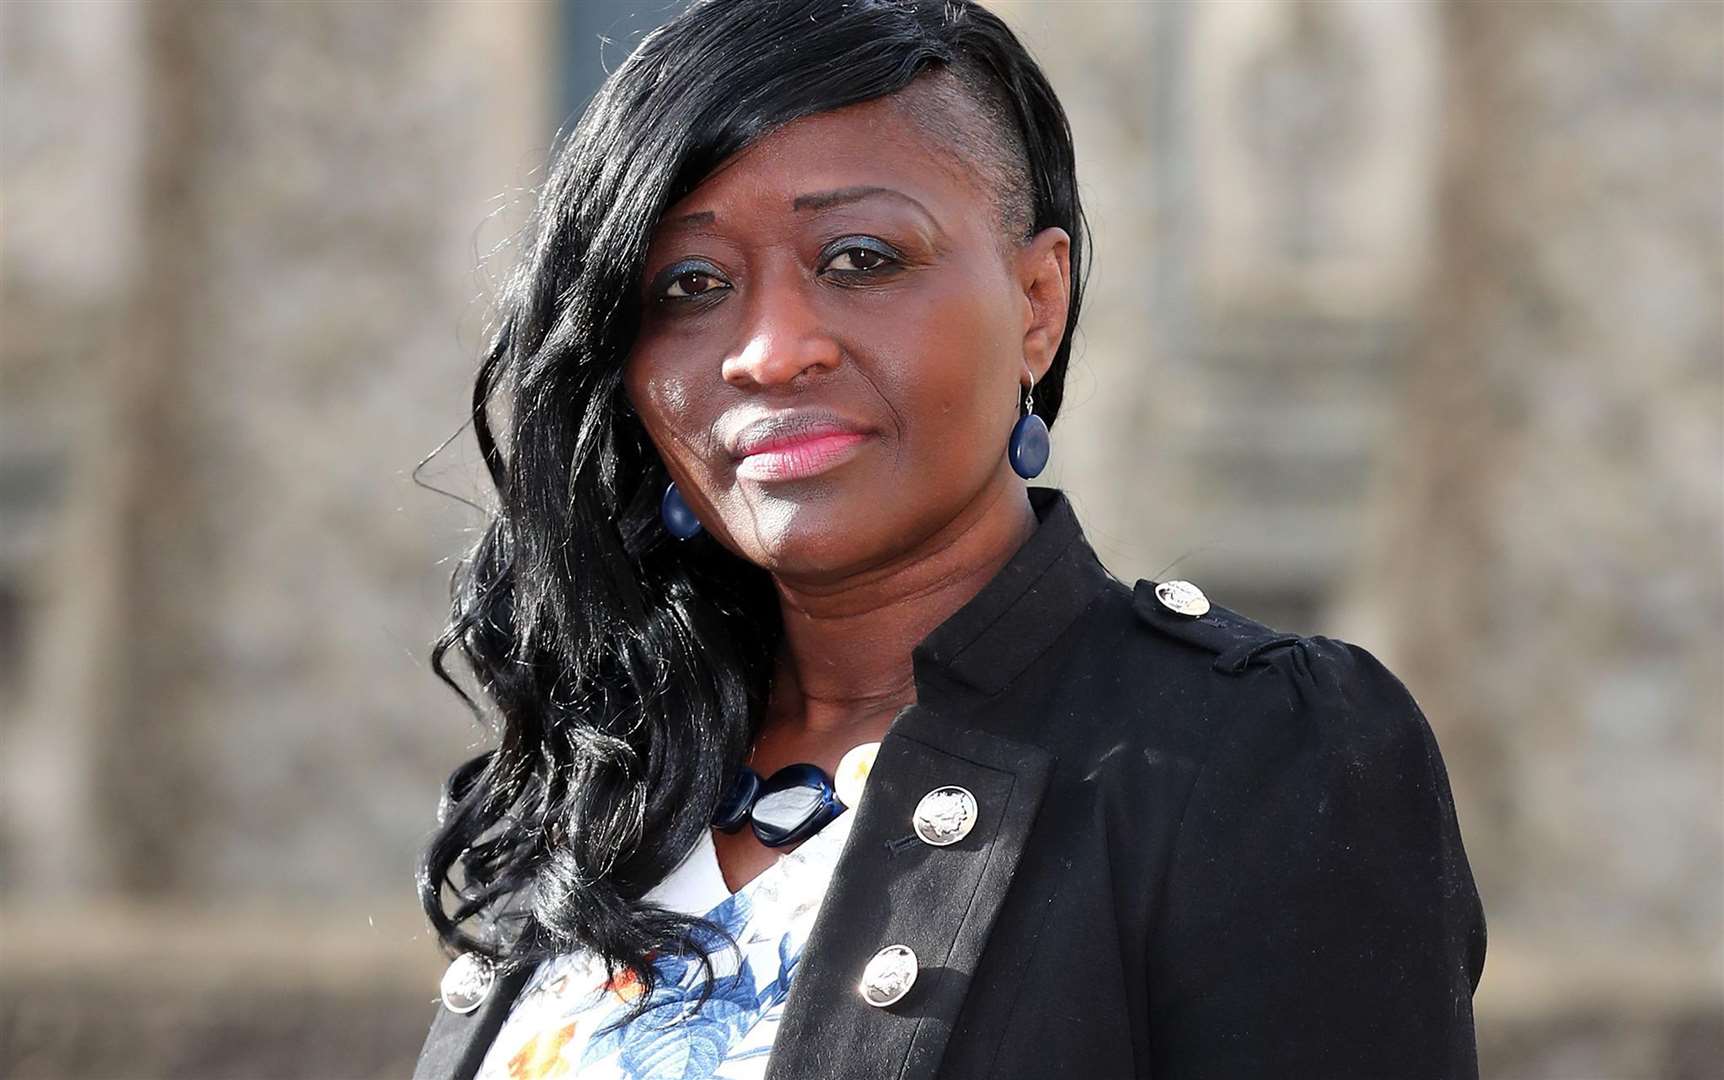 Nurse Sarah Kuteh was sacked from Darent Valley Hospital